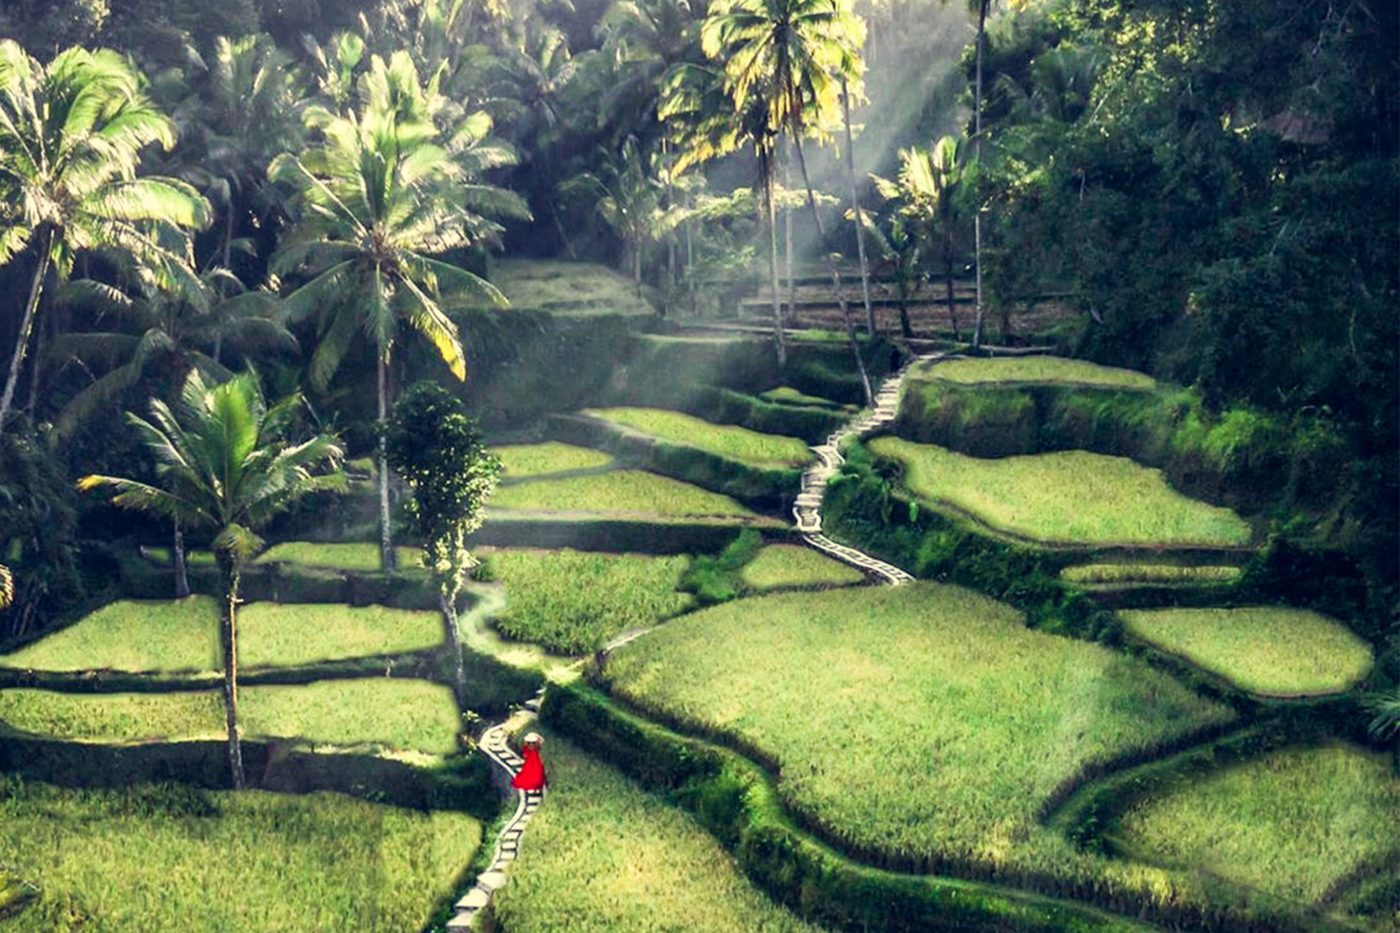 Are You Preparing A Holiday Trip To Bali? Check Out These Three